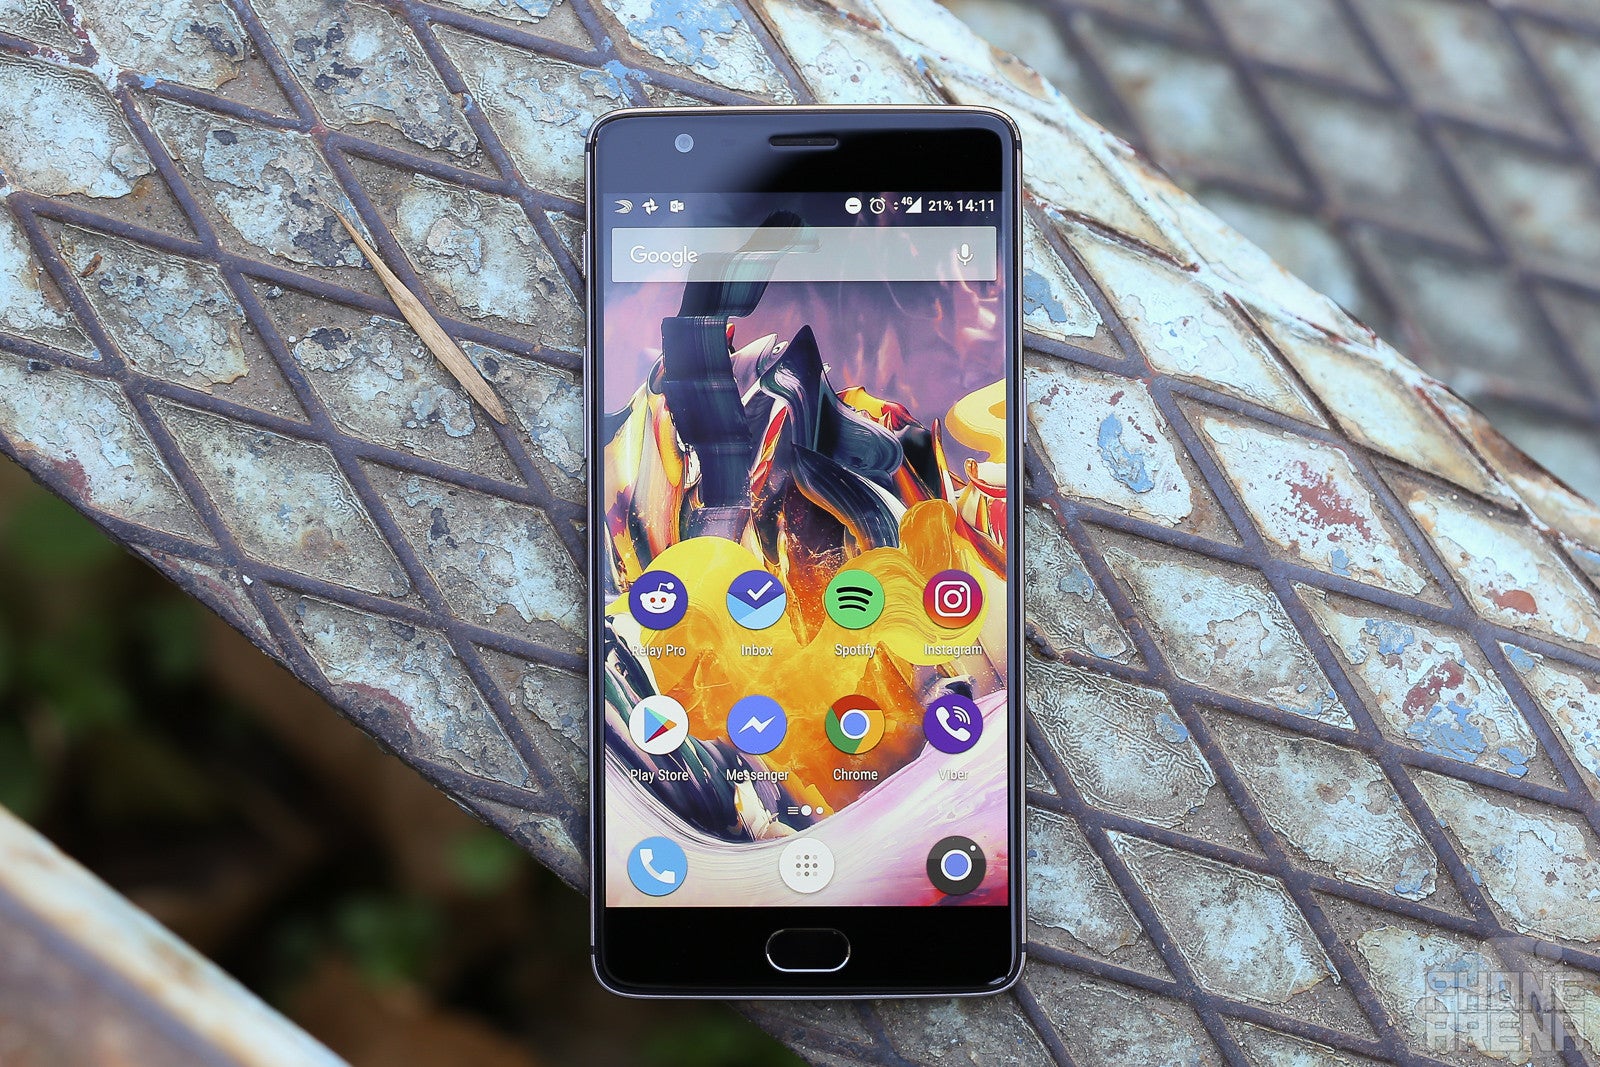 OnePlus 3T Review